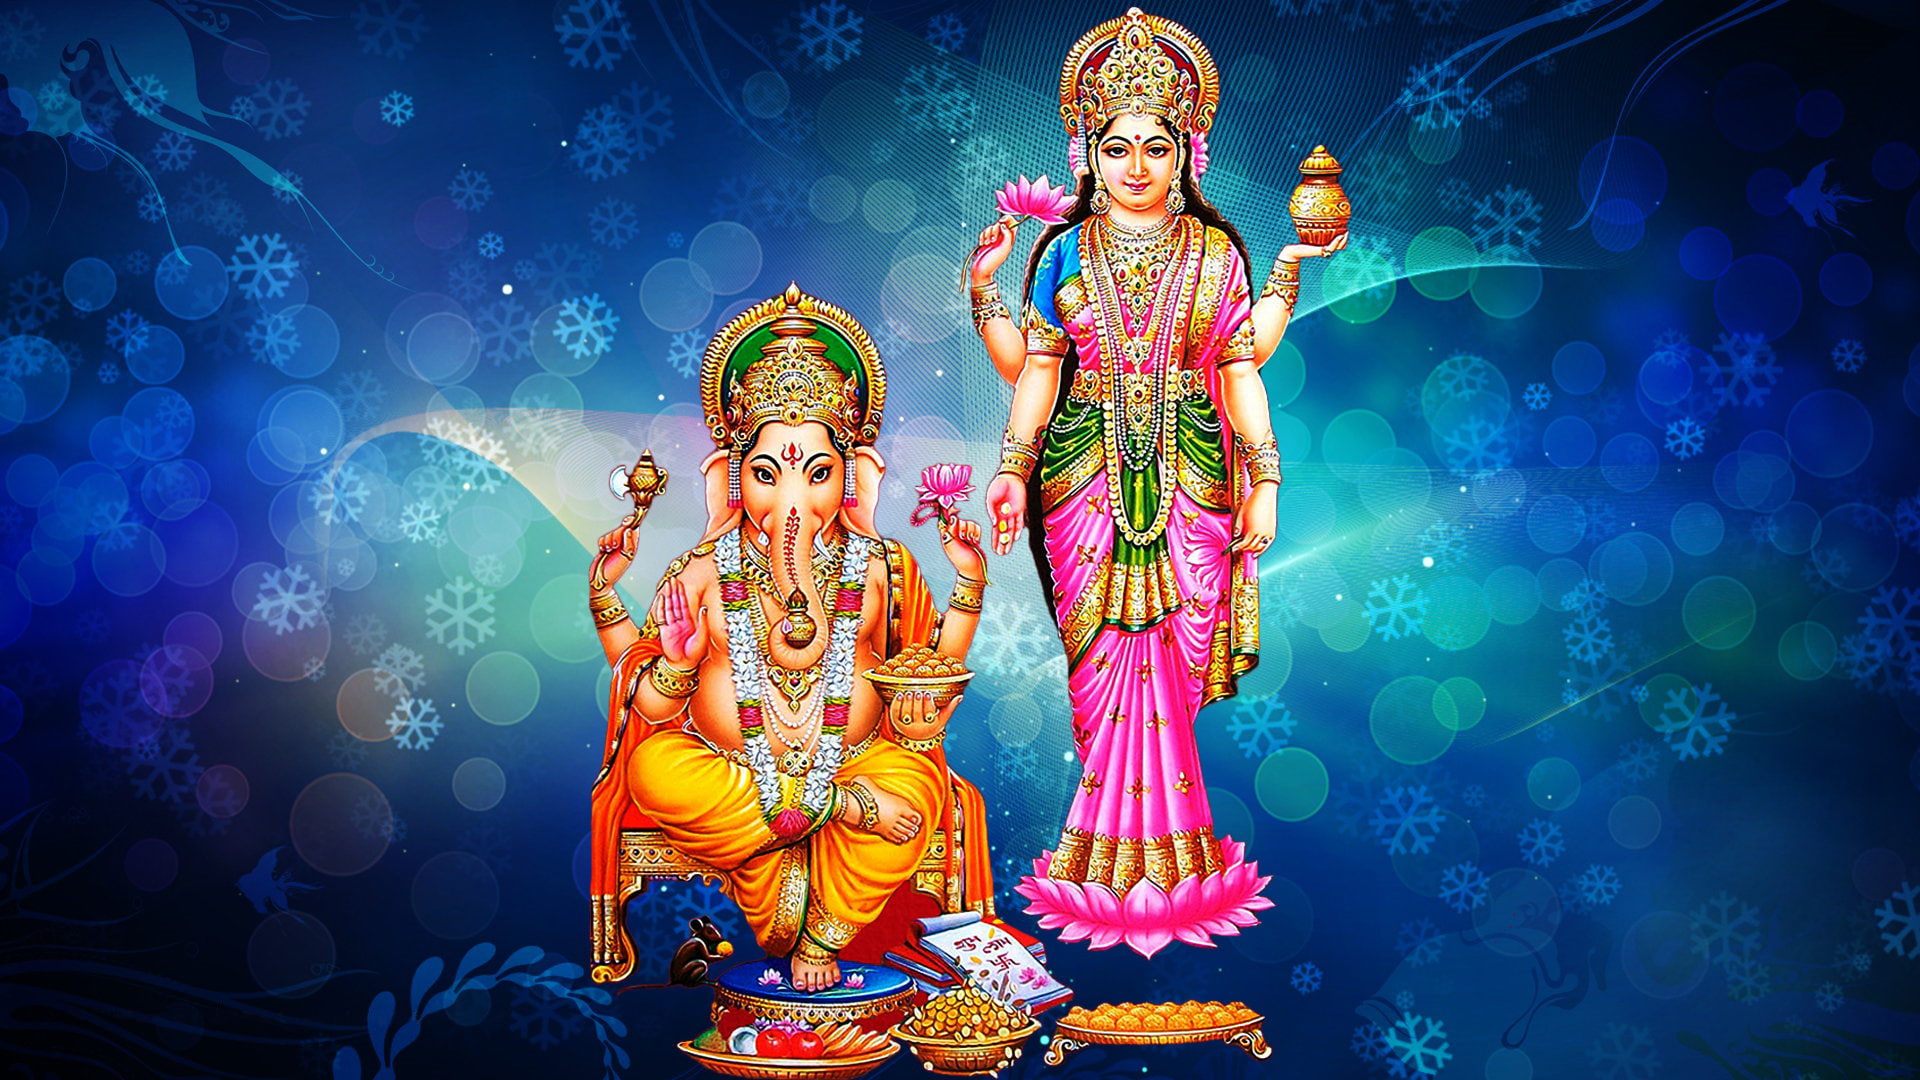 Goddess Laxmi And Lord Ganesh Blue Decorative Background With Snowflakes Hd Wallpaper 1920×1080